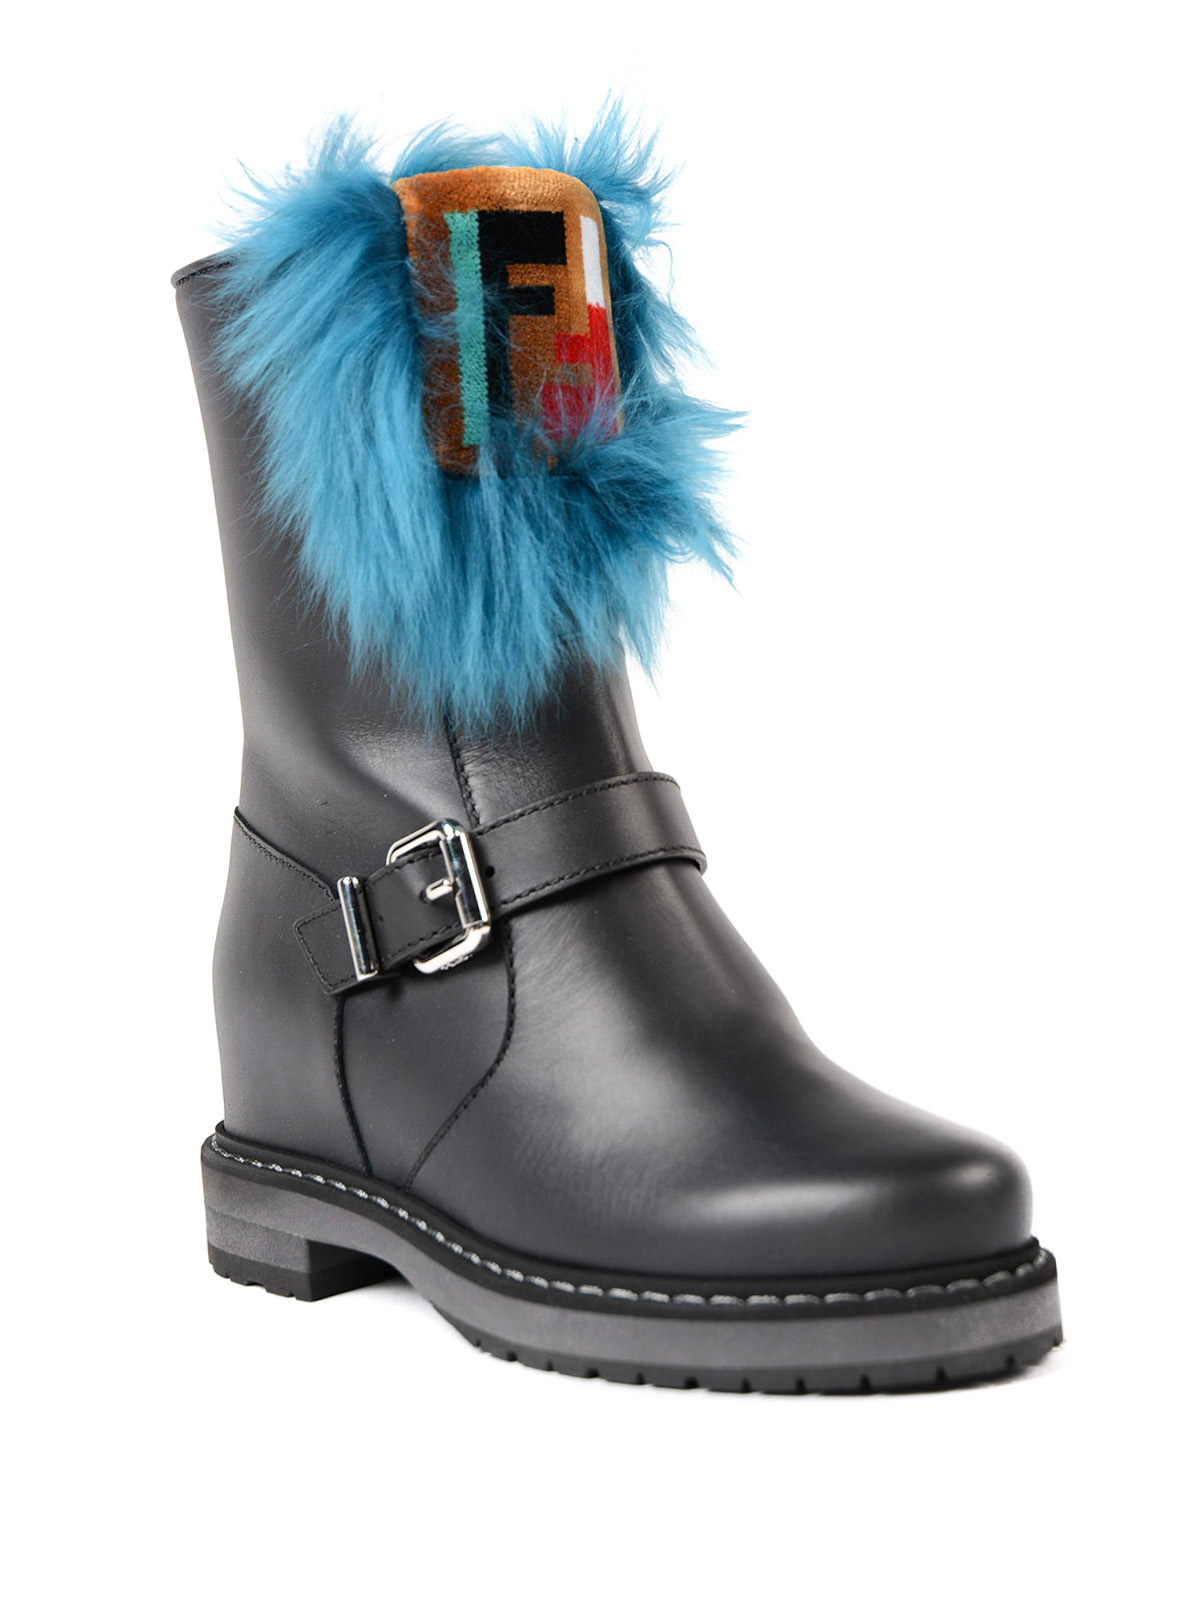 wedge boots with fur